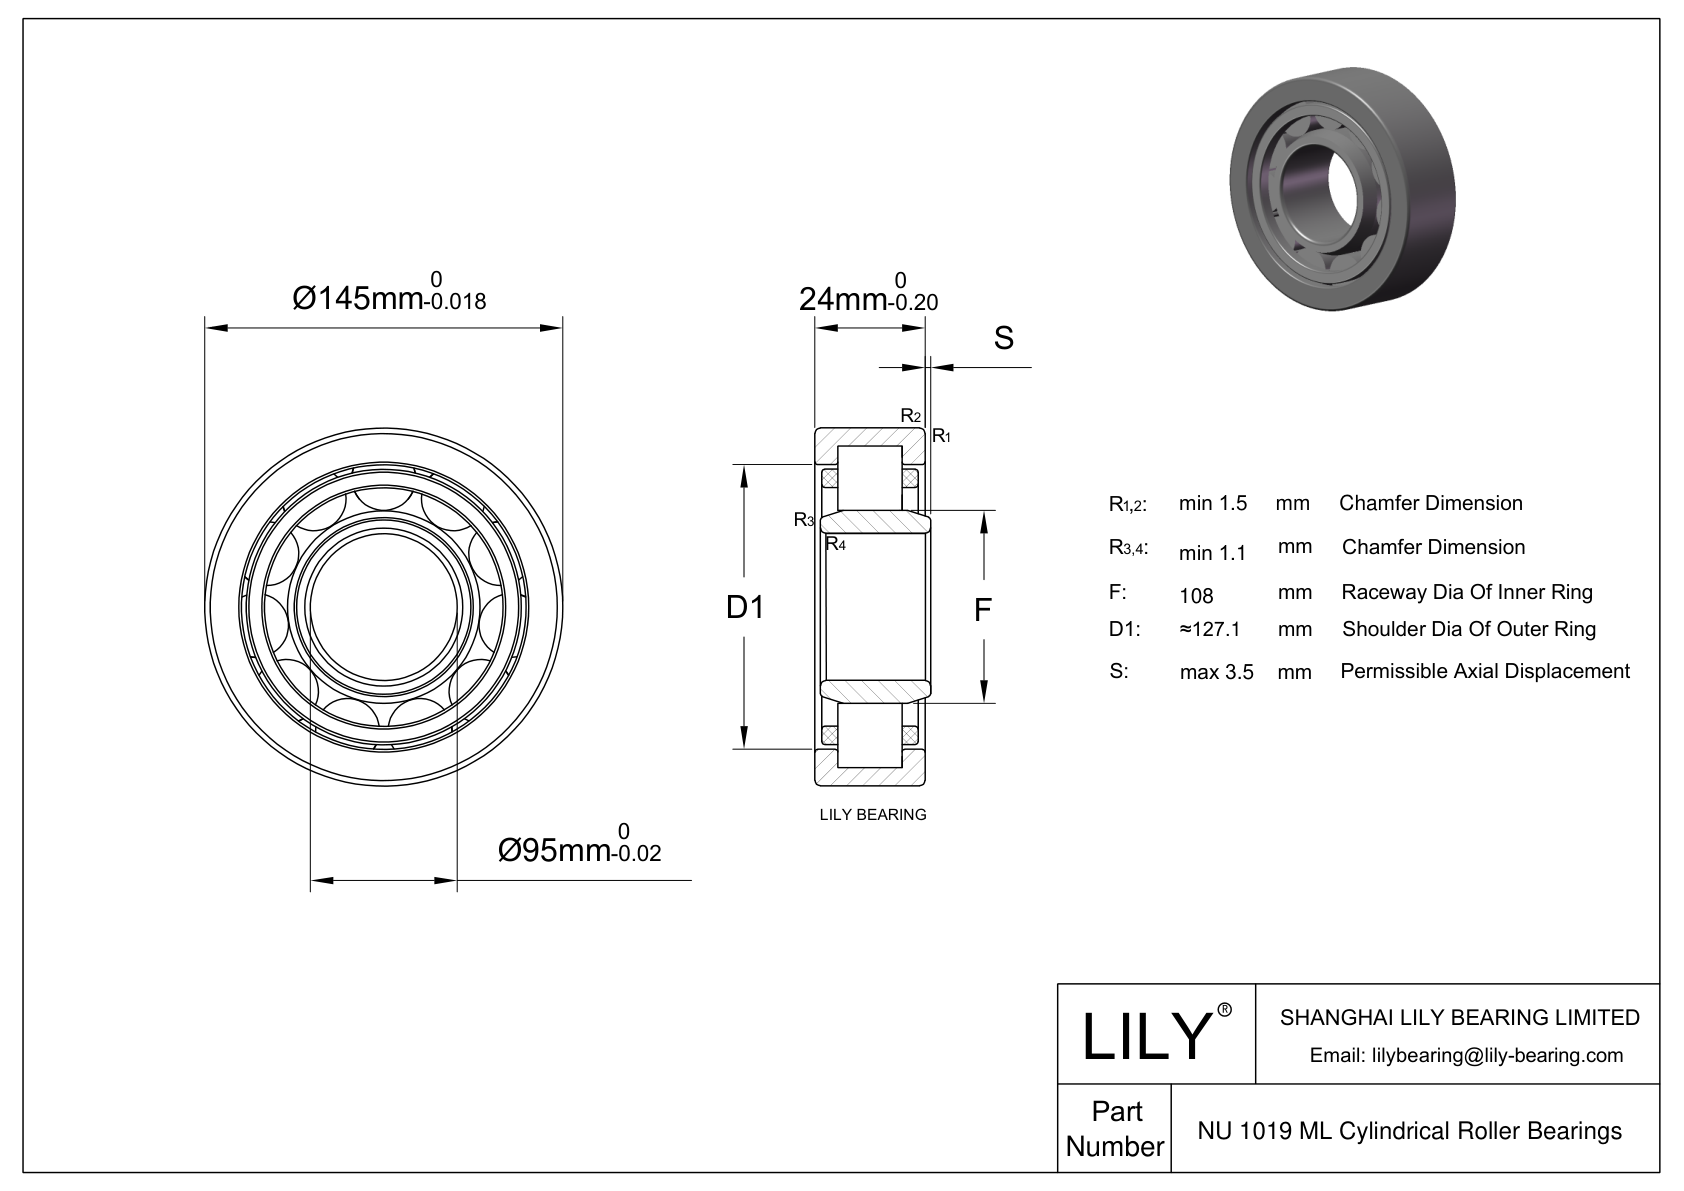 NU 1019 ML/C3VL0241 Ceramic Coated Cylindrical Roller Bearings cad drawing